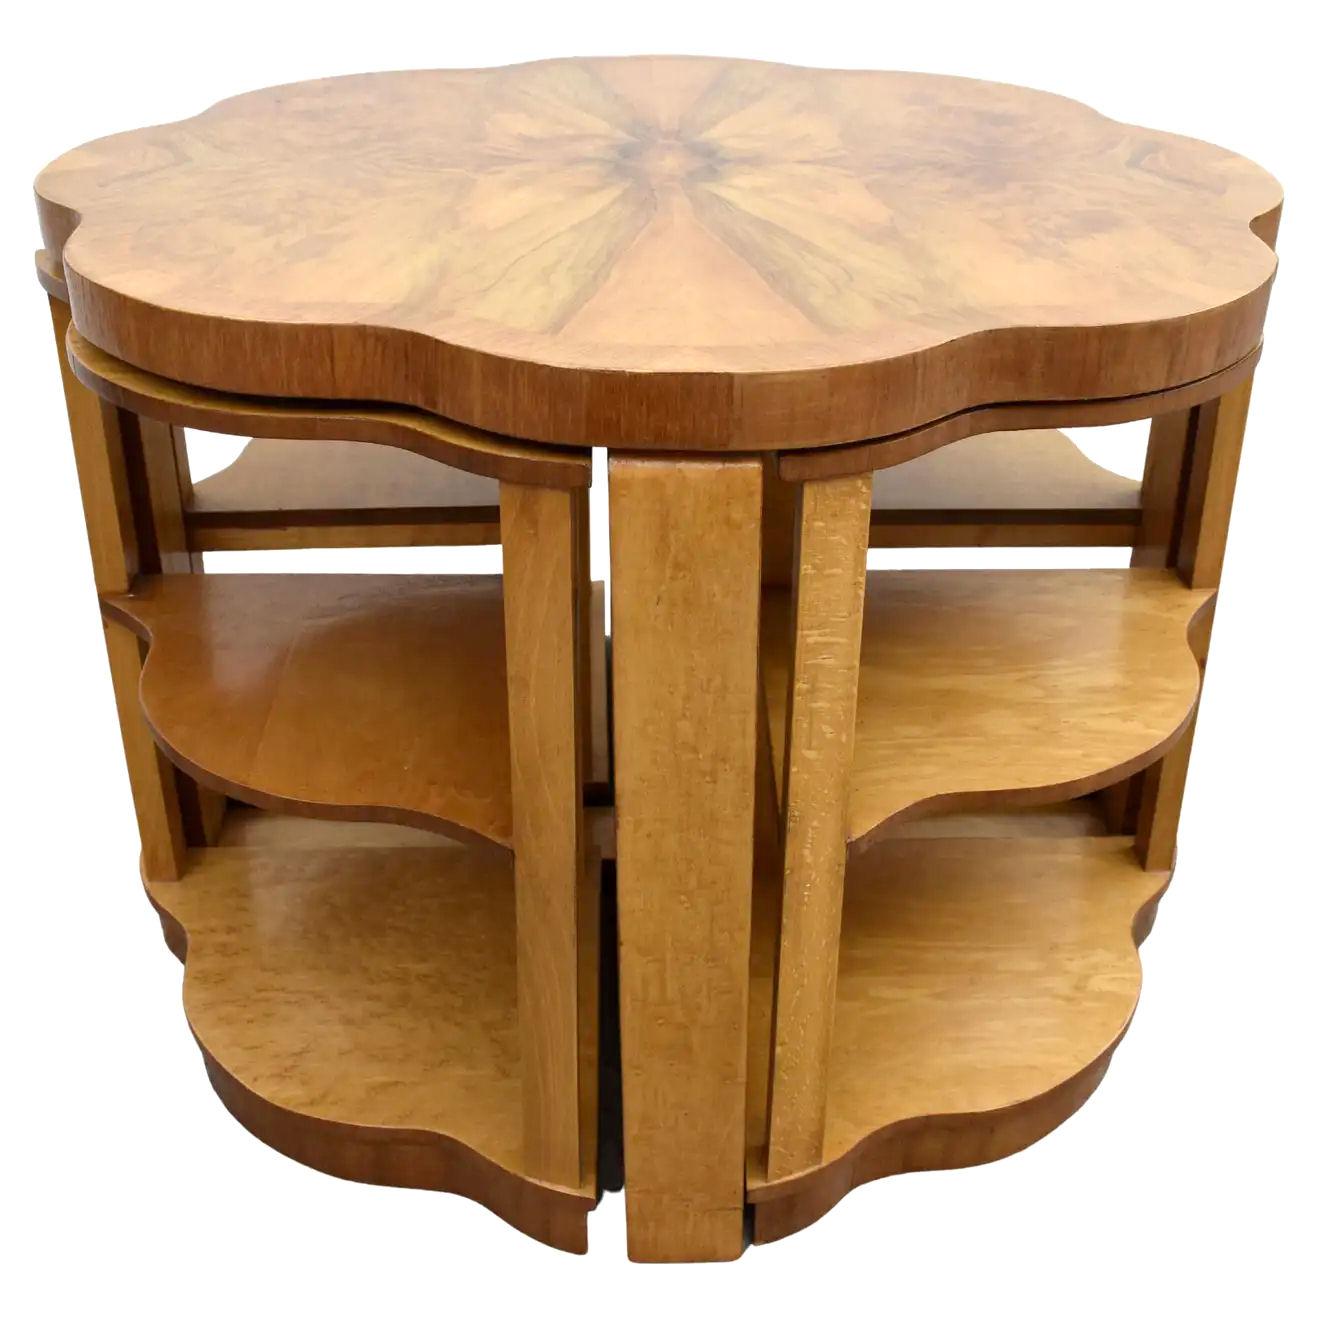 Art Deco High Quality Walnut & Maple Nest of 5 Tables by Epstein, English, 1930 For Sale 5